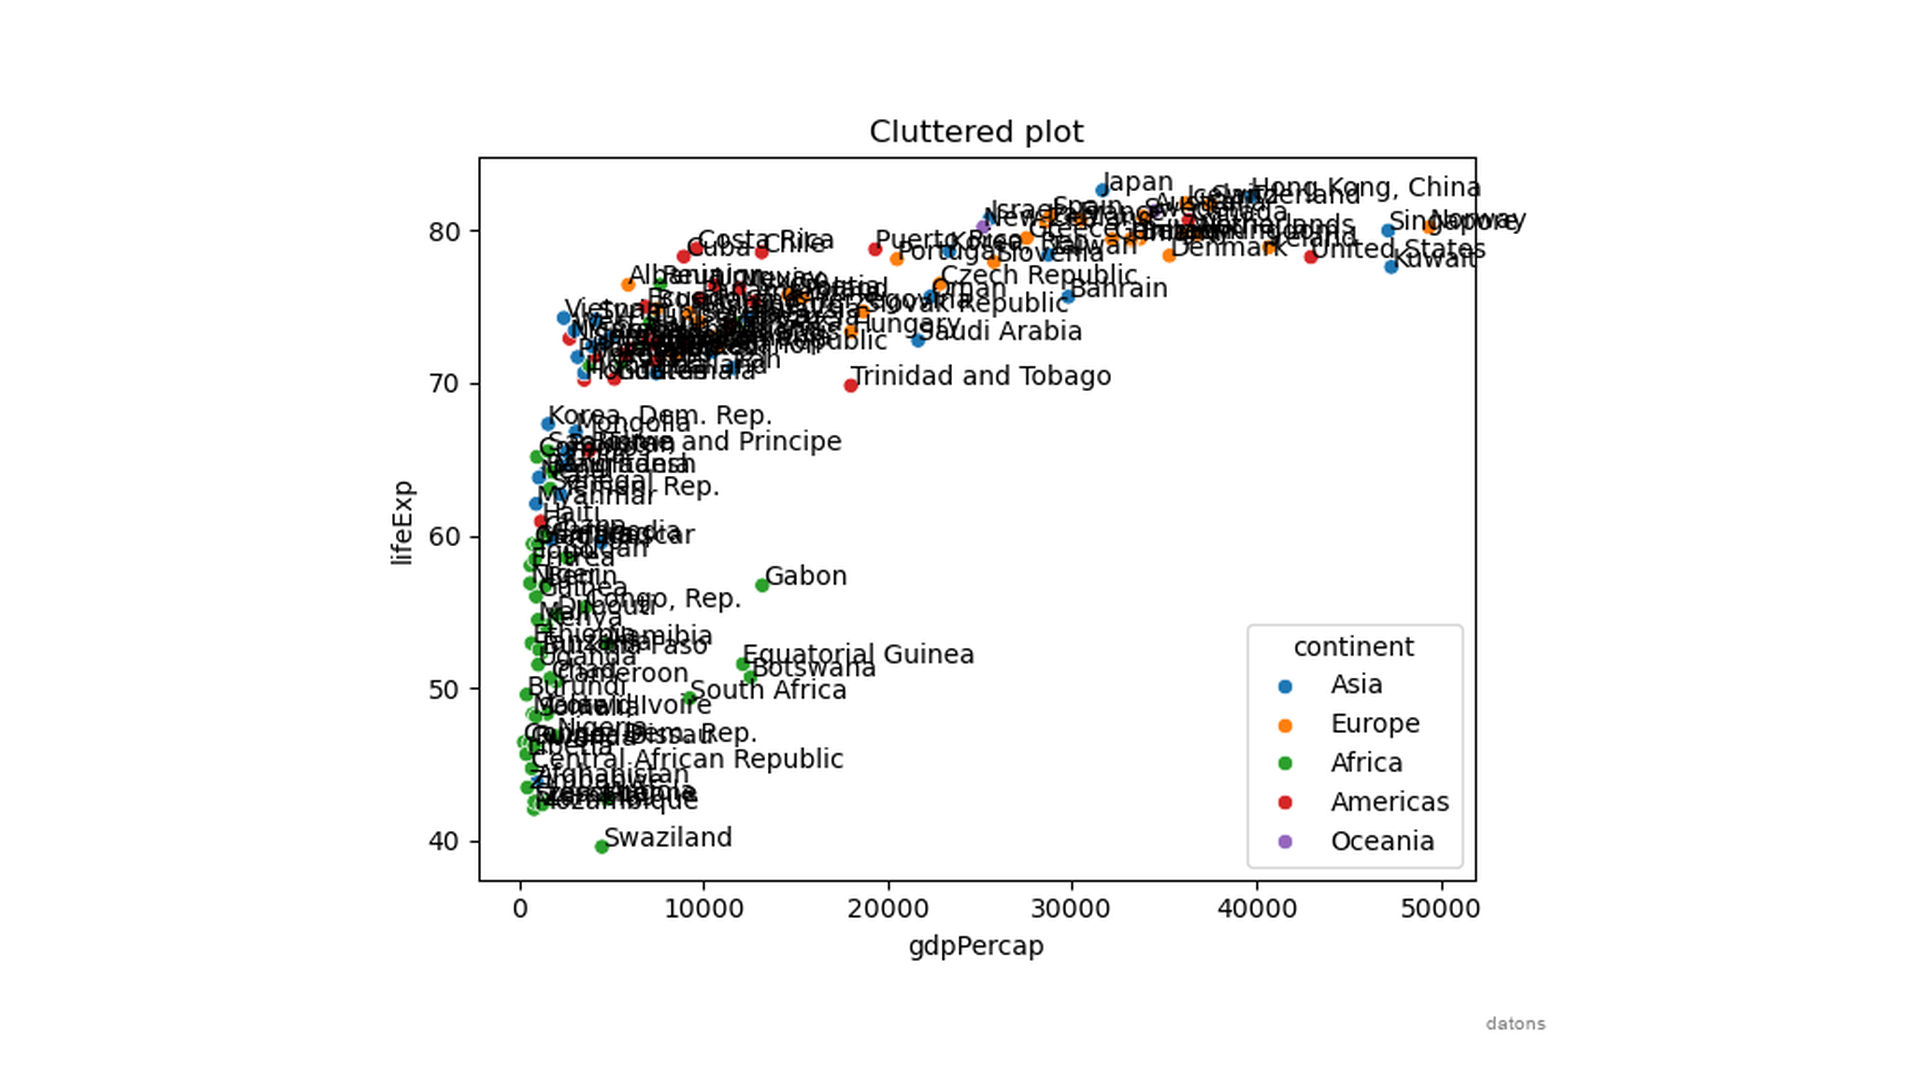 Highly cluttered scatter plot with country names and a title, showcasing the drawbacks of excessive labeling